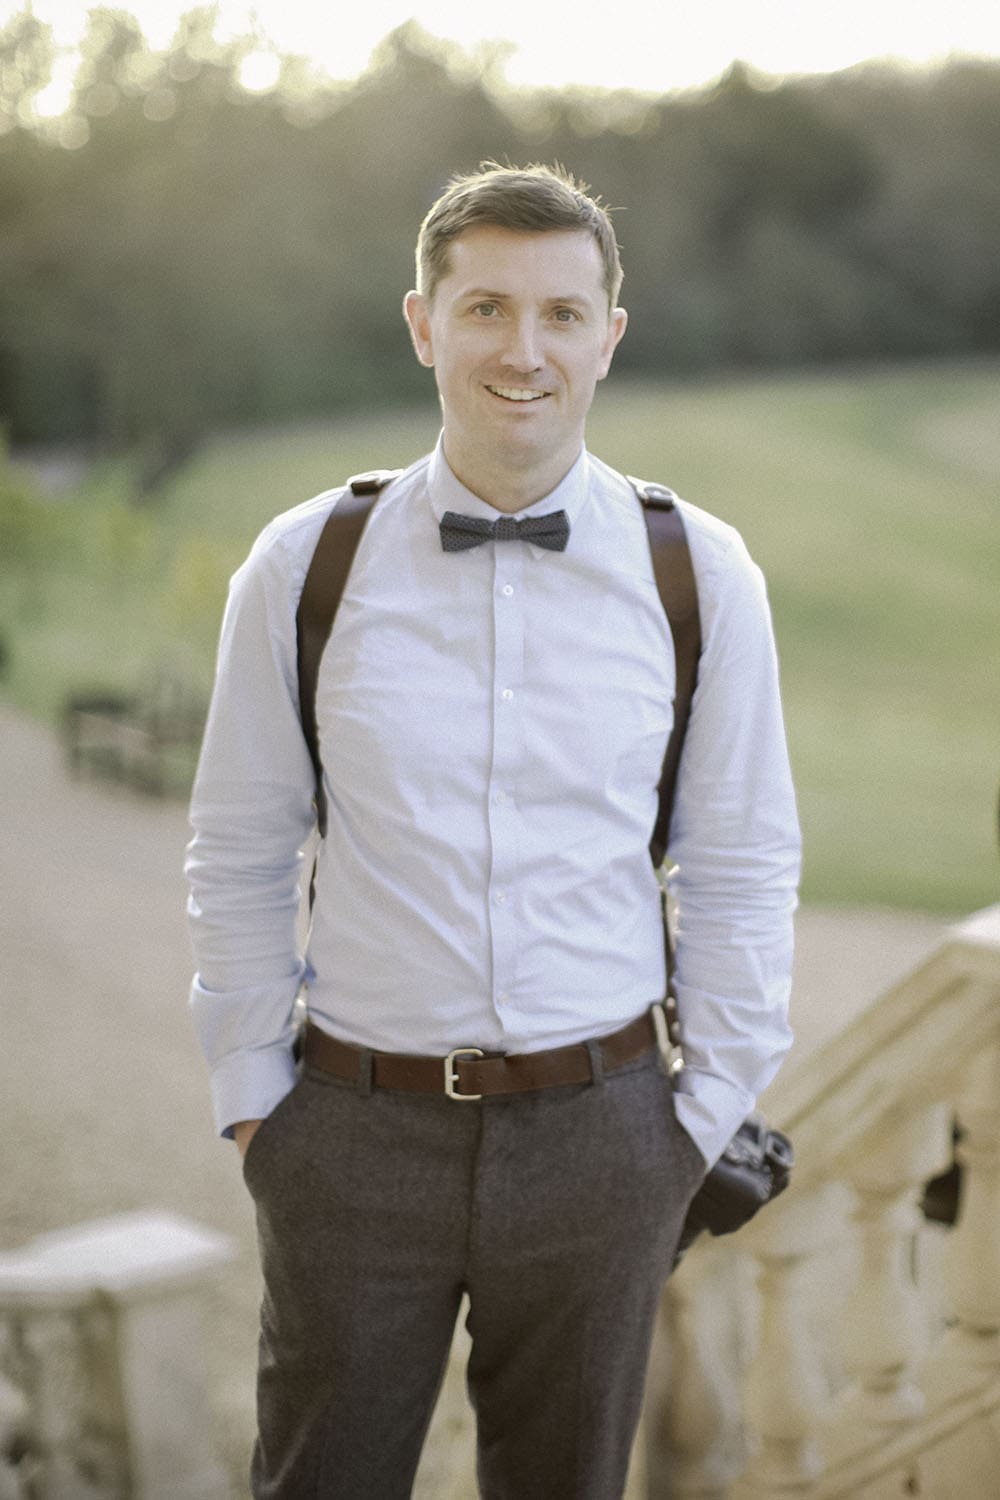 Sussex wedding photographer Murray Clarke focuses on the special moments.